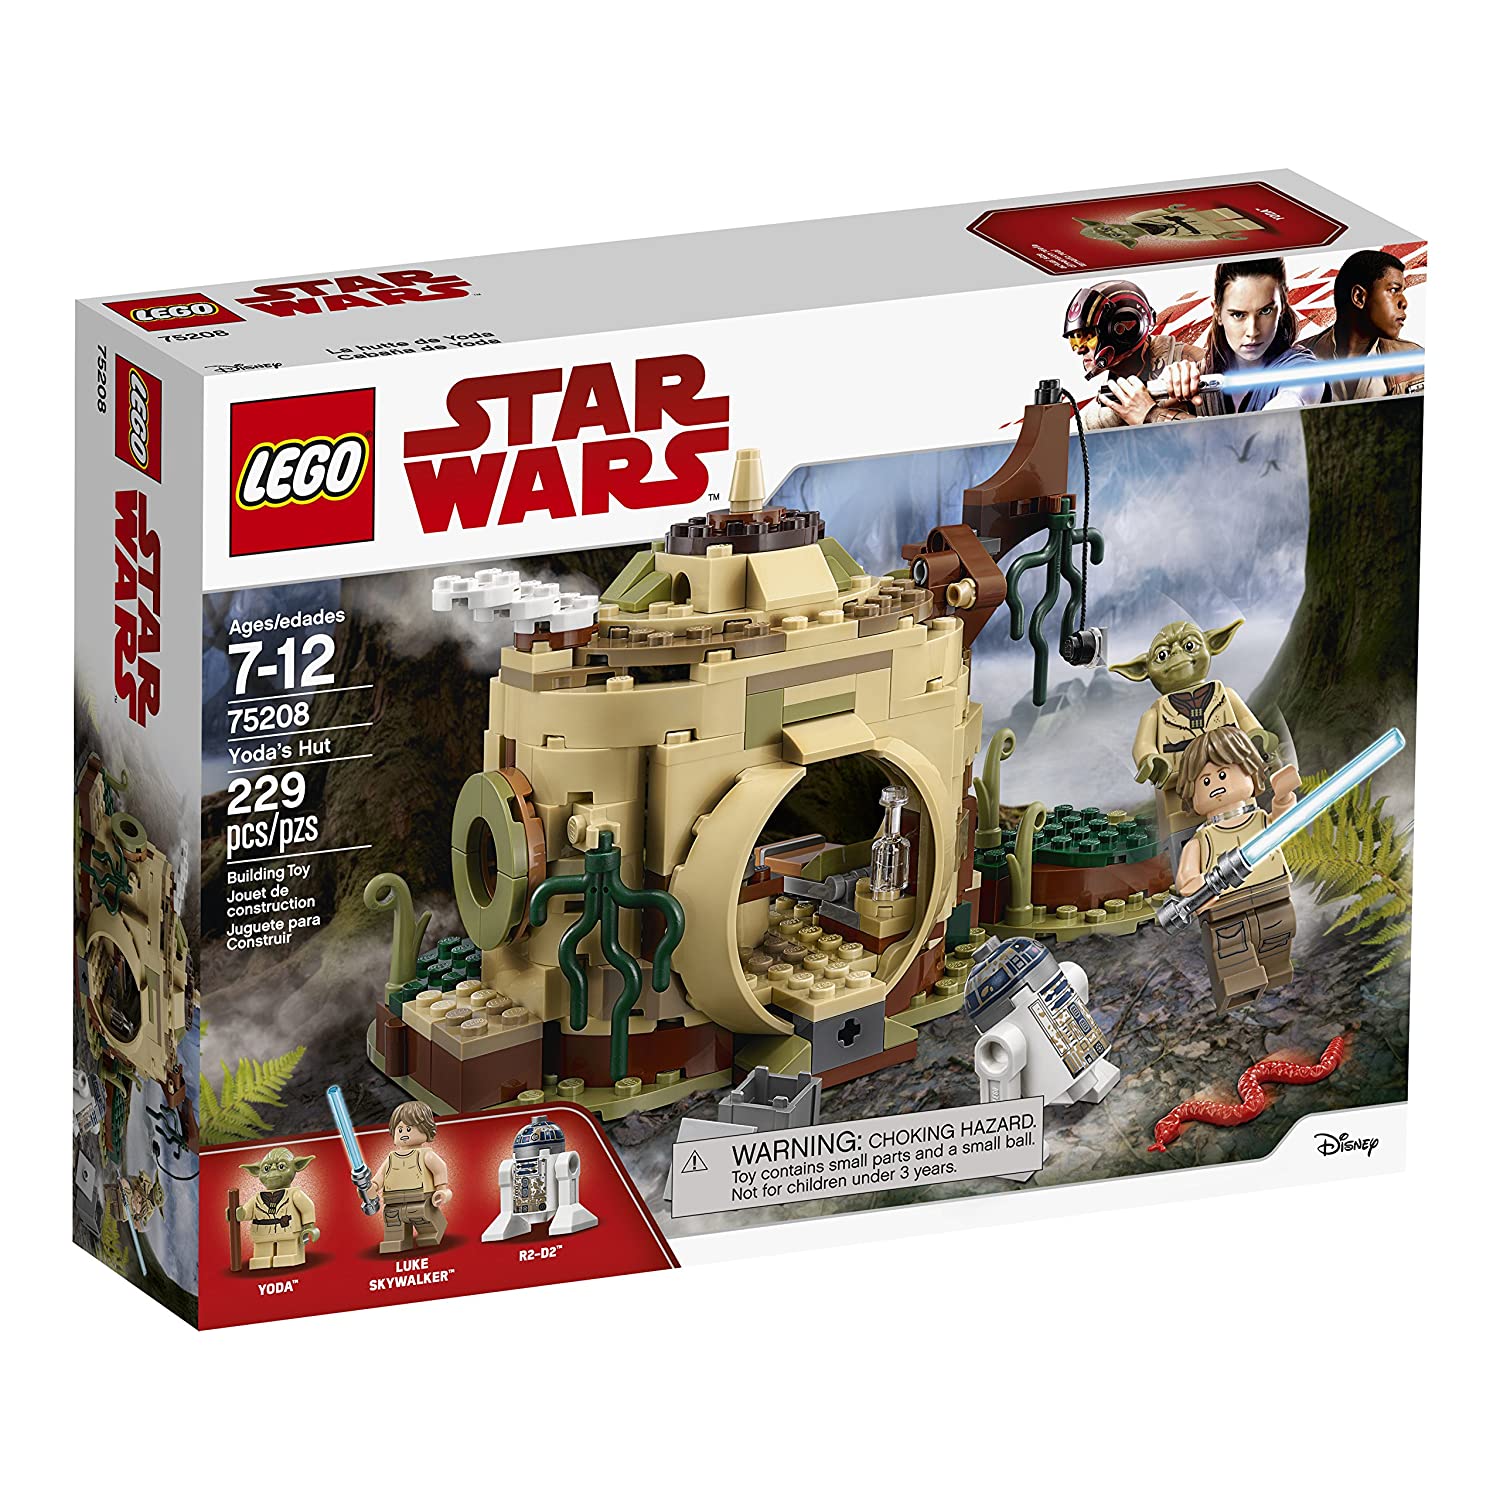 Top 5 Best LEGO Yoda Sets Reviews in 2022 4